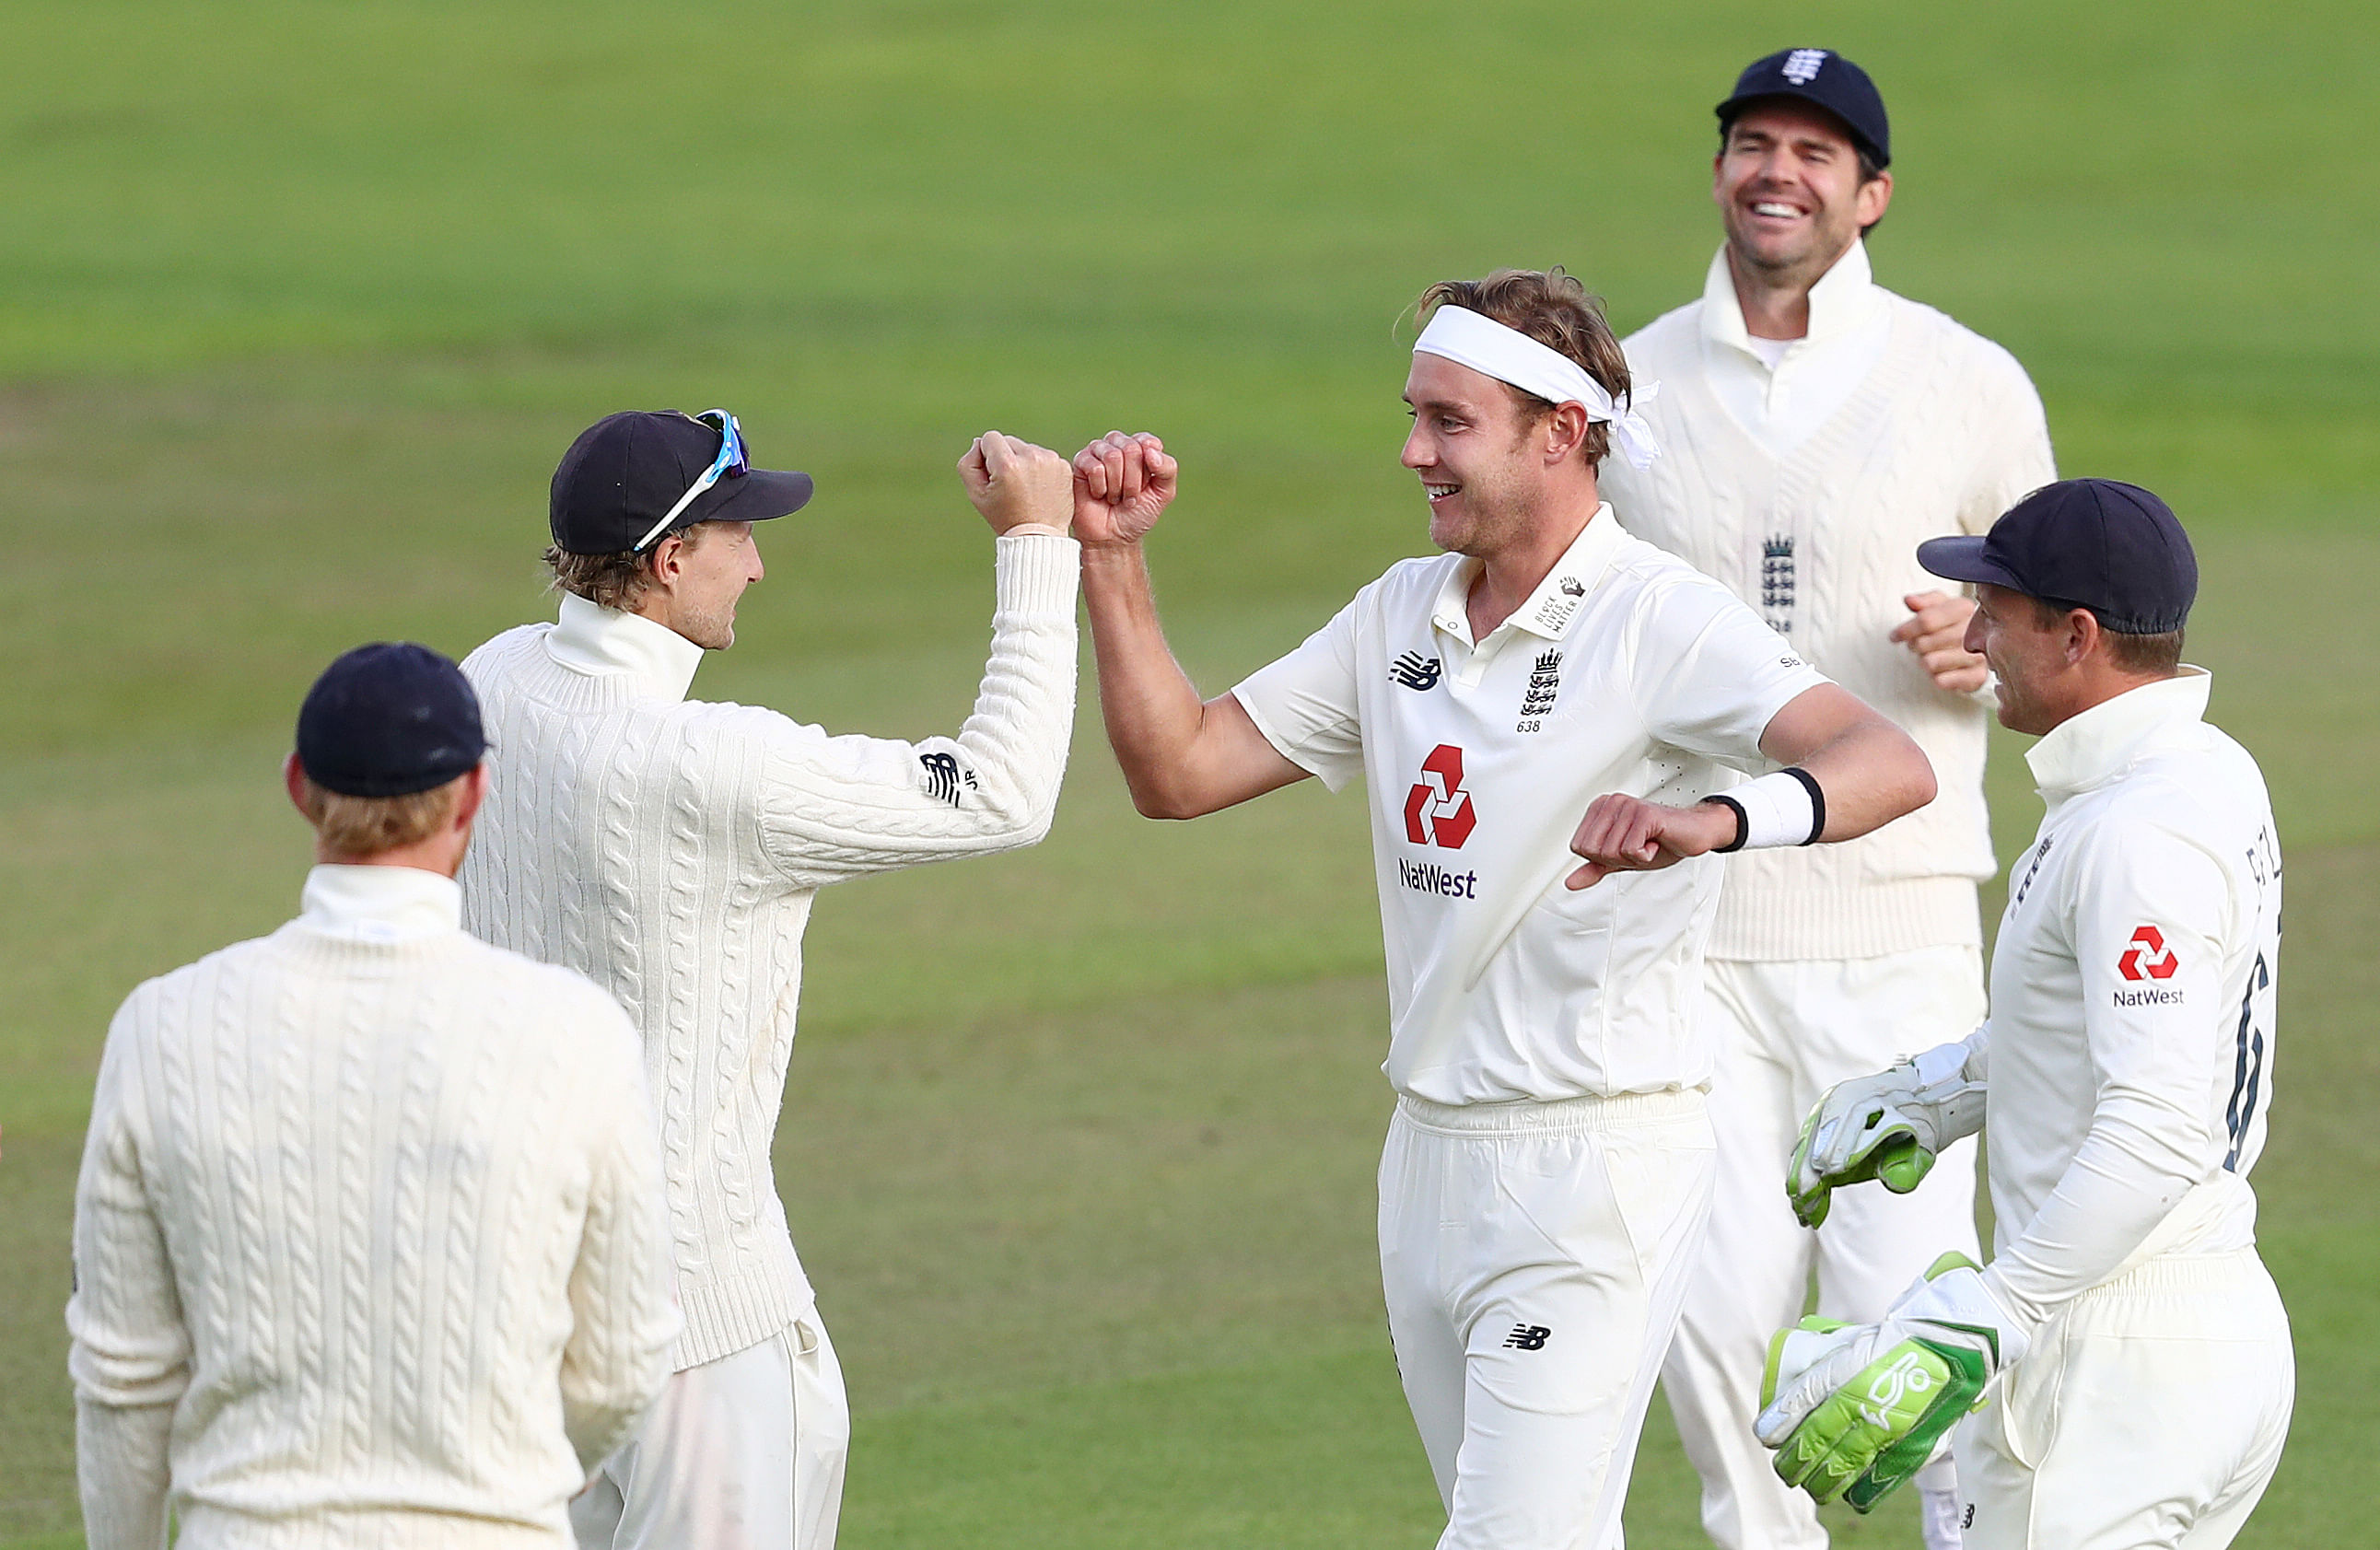 England's Stuart Broad celebrates taking the wicket of West Indies' John Campbell with teammates, as play resumes behind closed doors following the outbreak of the coronavirus disease (Covid-19). Credit: REUTERS Photo